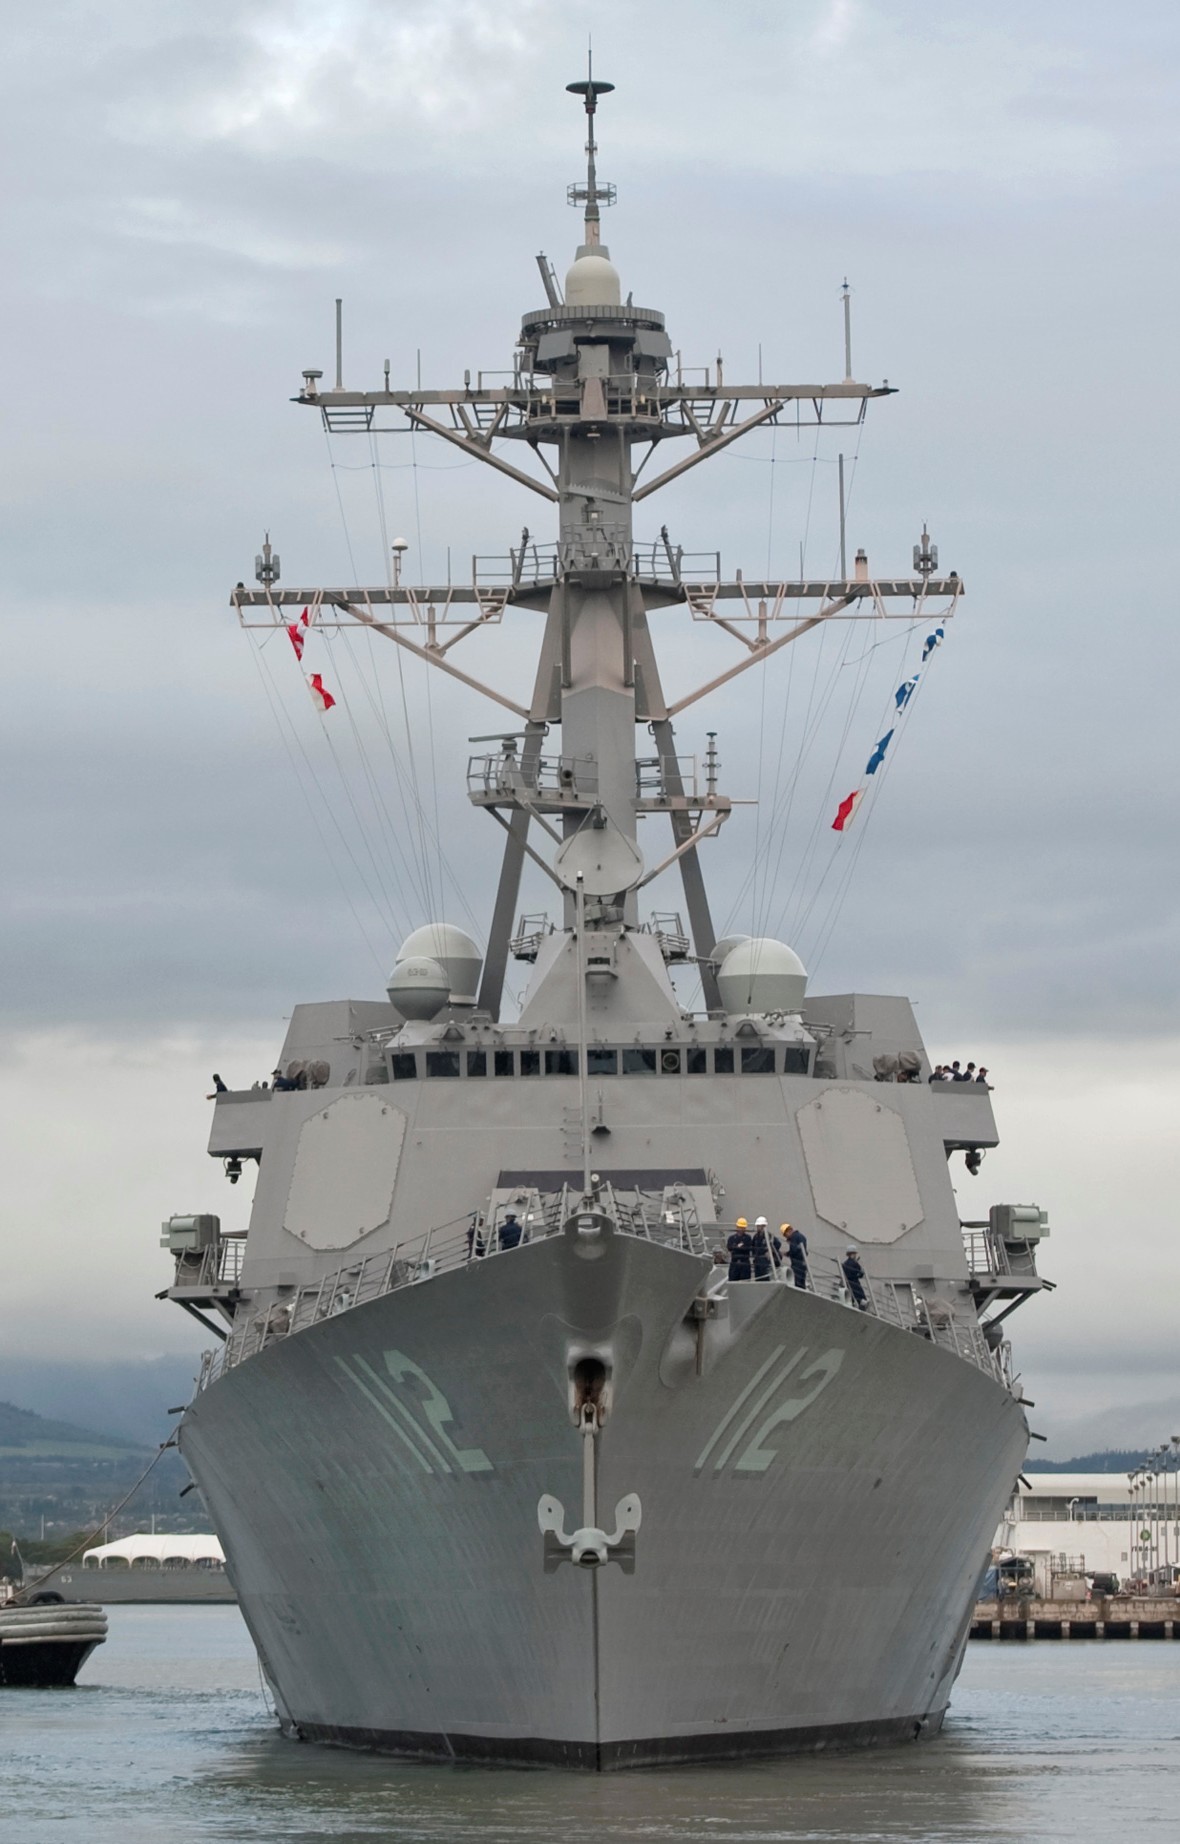 ddg-112 uss michael murphy arleigh burke class guided missile destroyer aegis us navy 62p